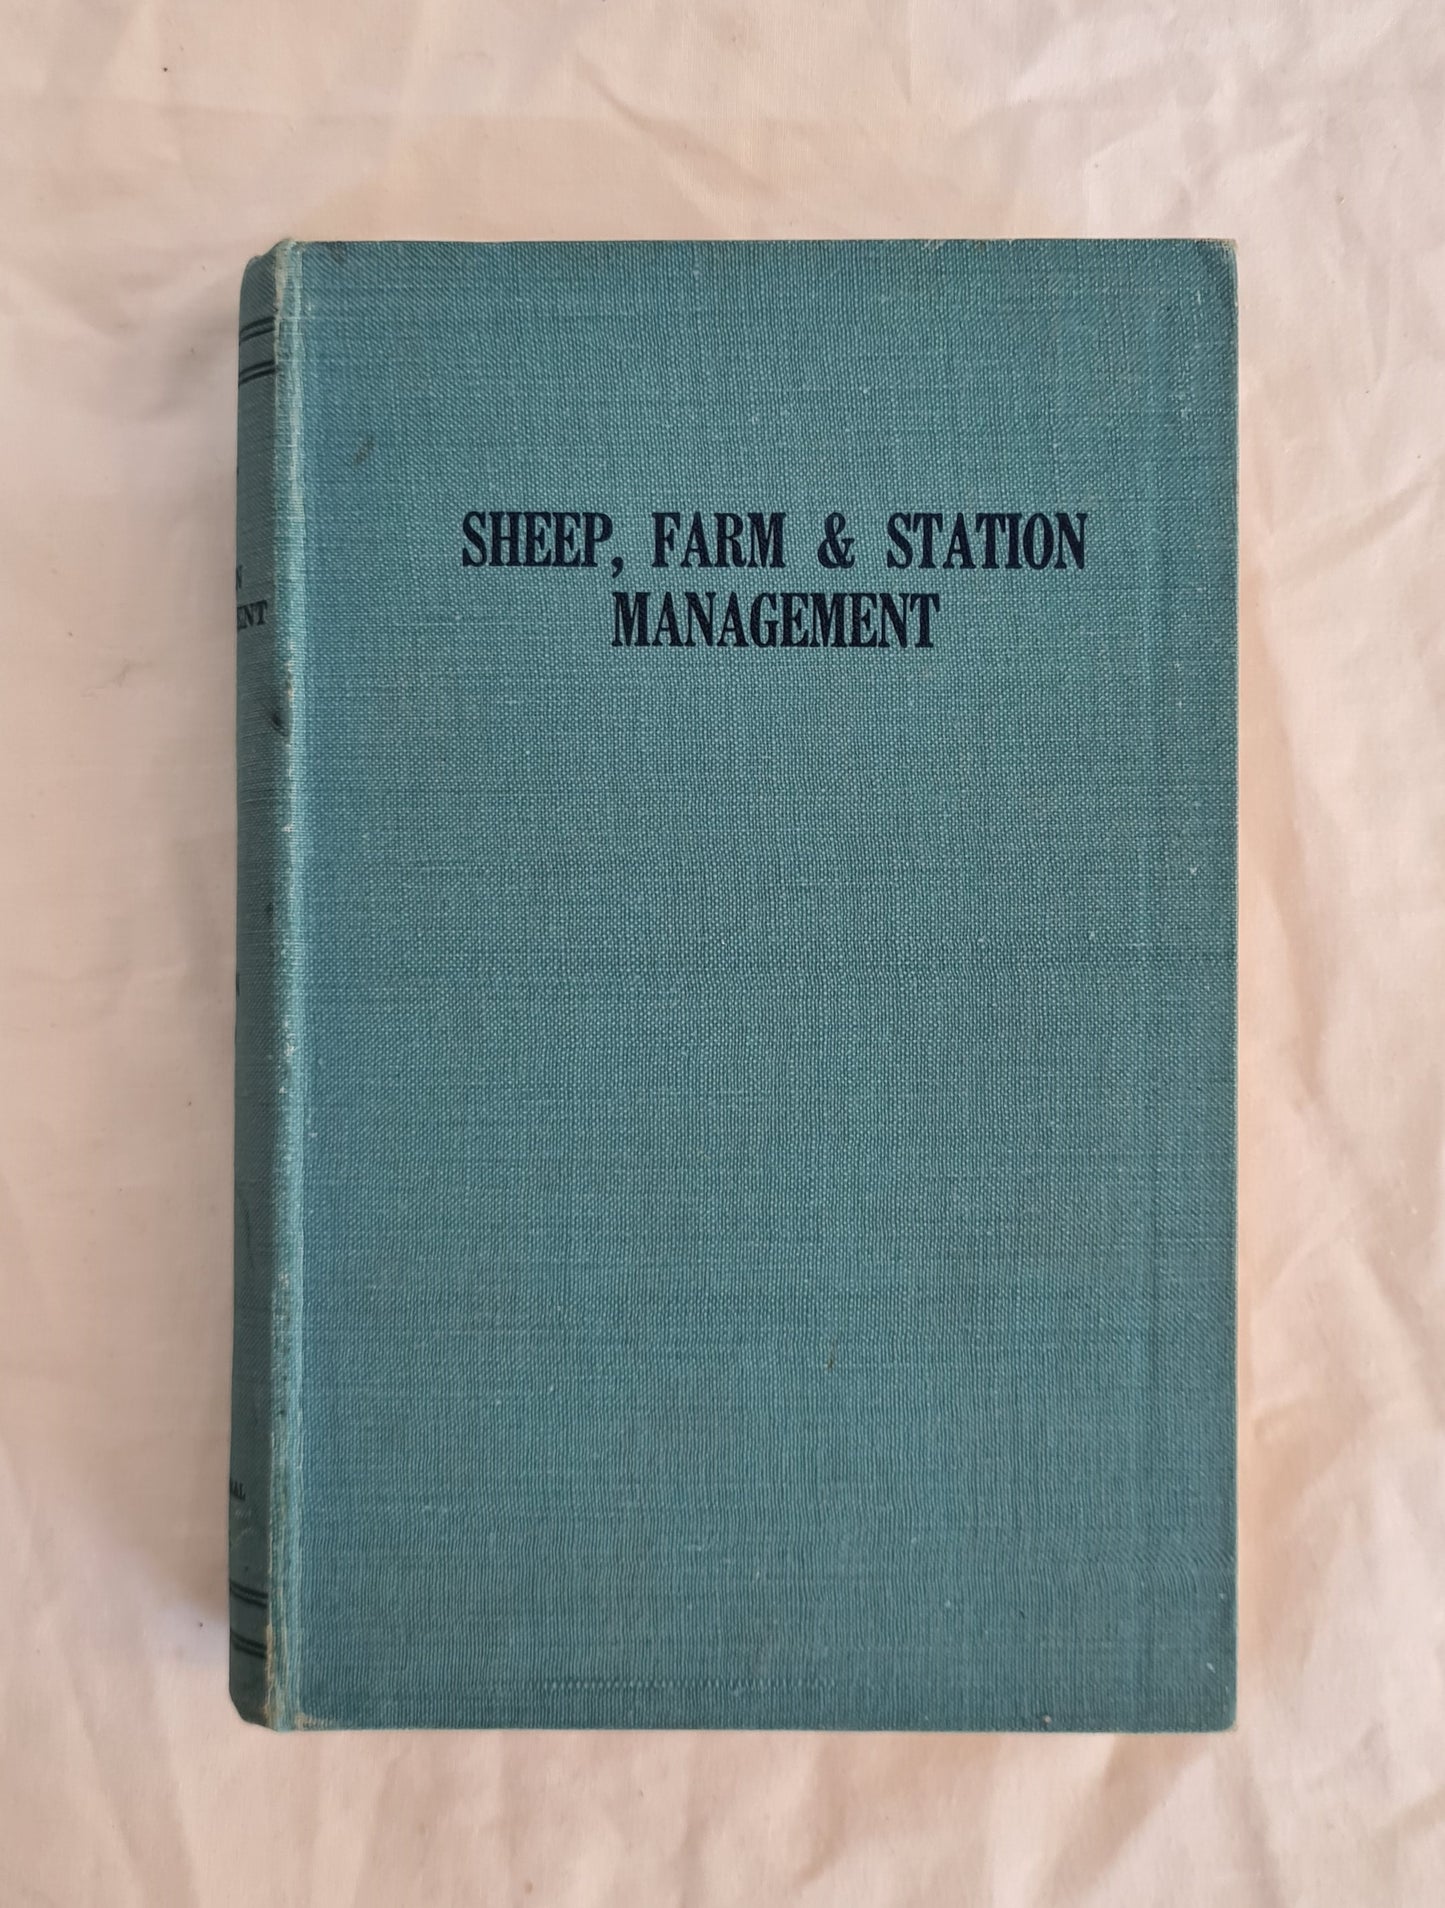 Sheep, Farm & Station Management by E. H. Pearse